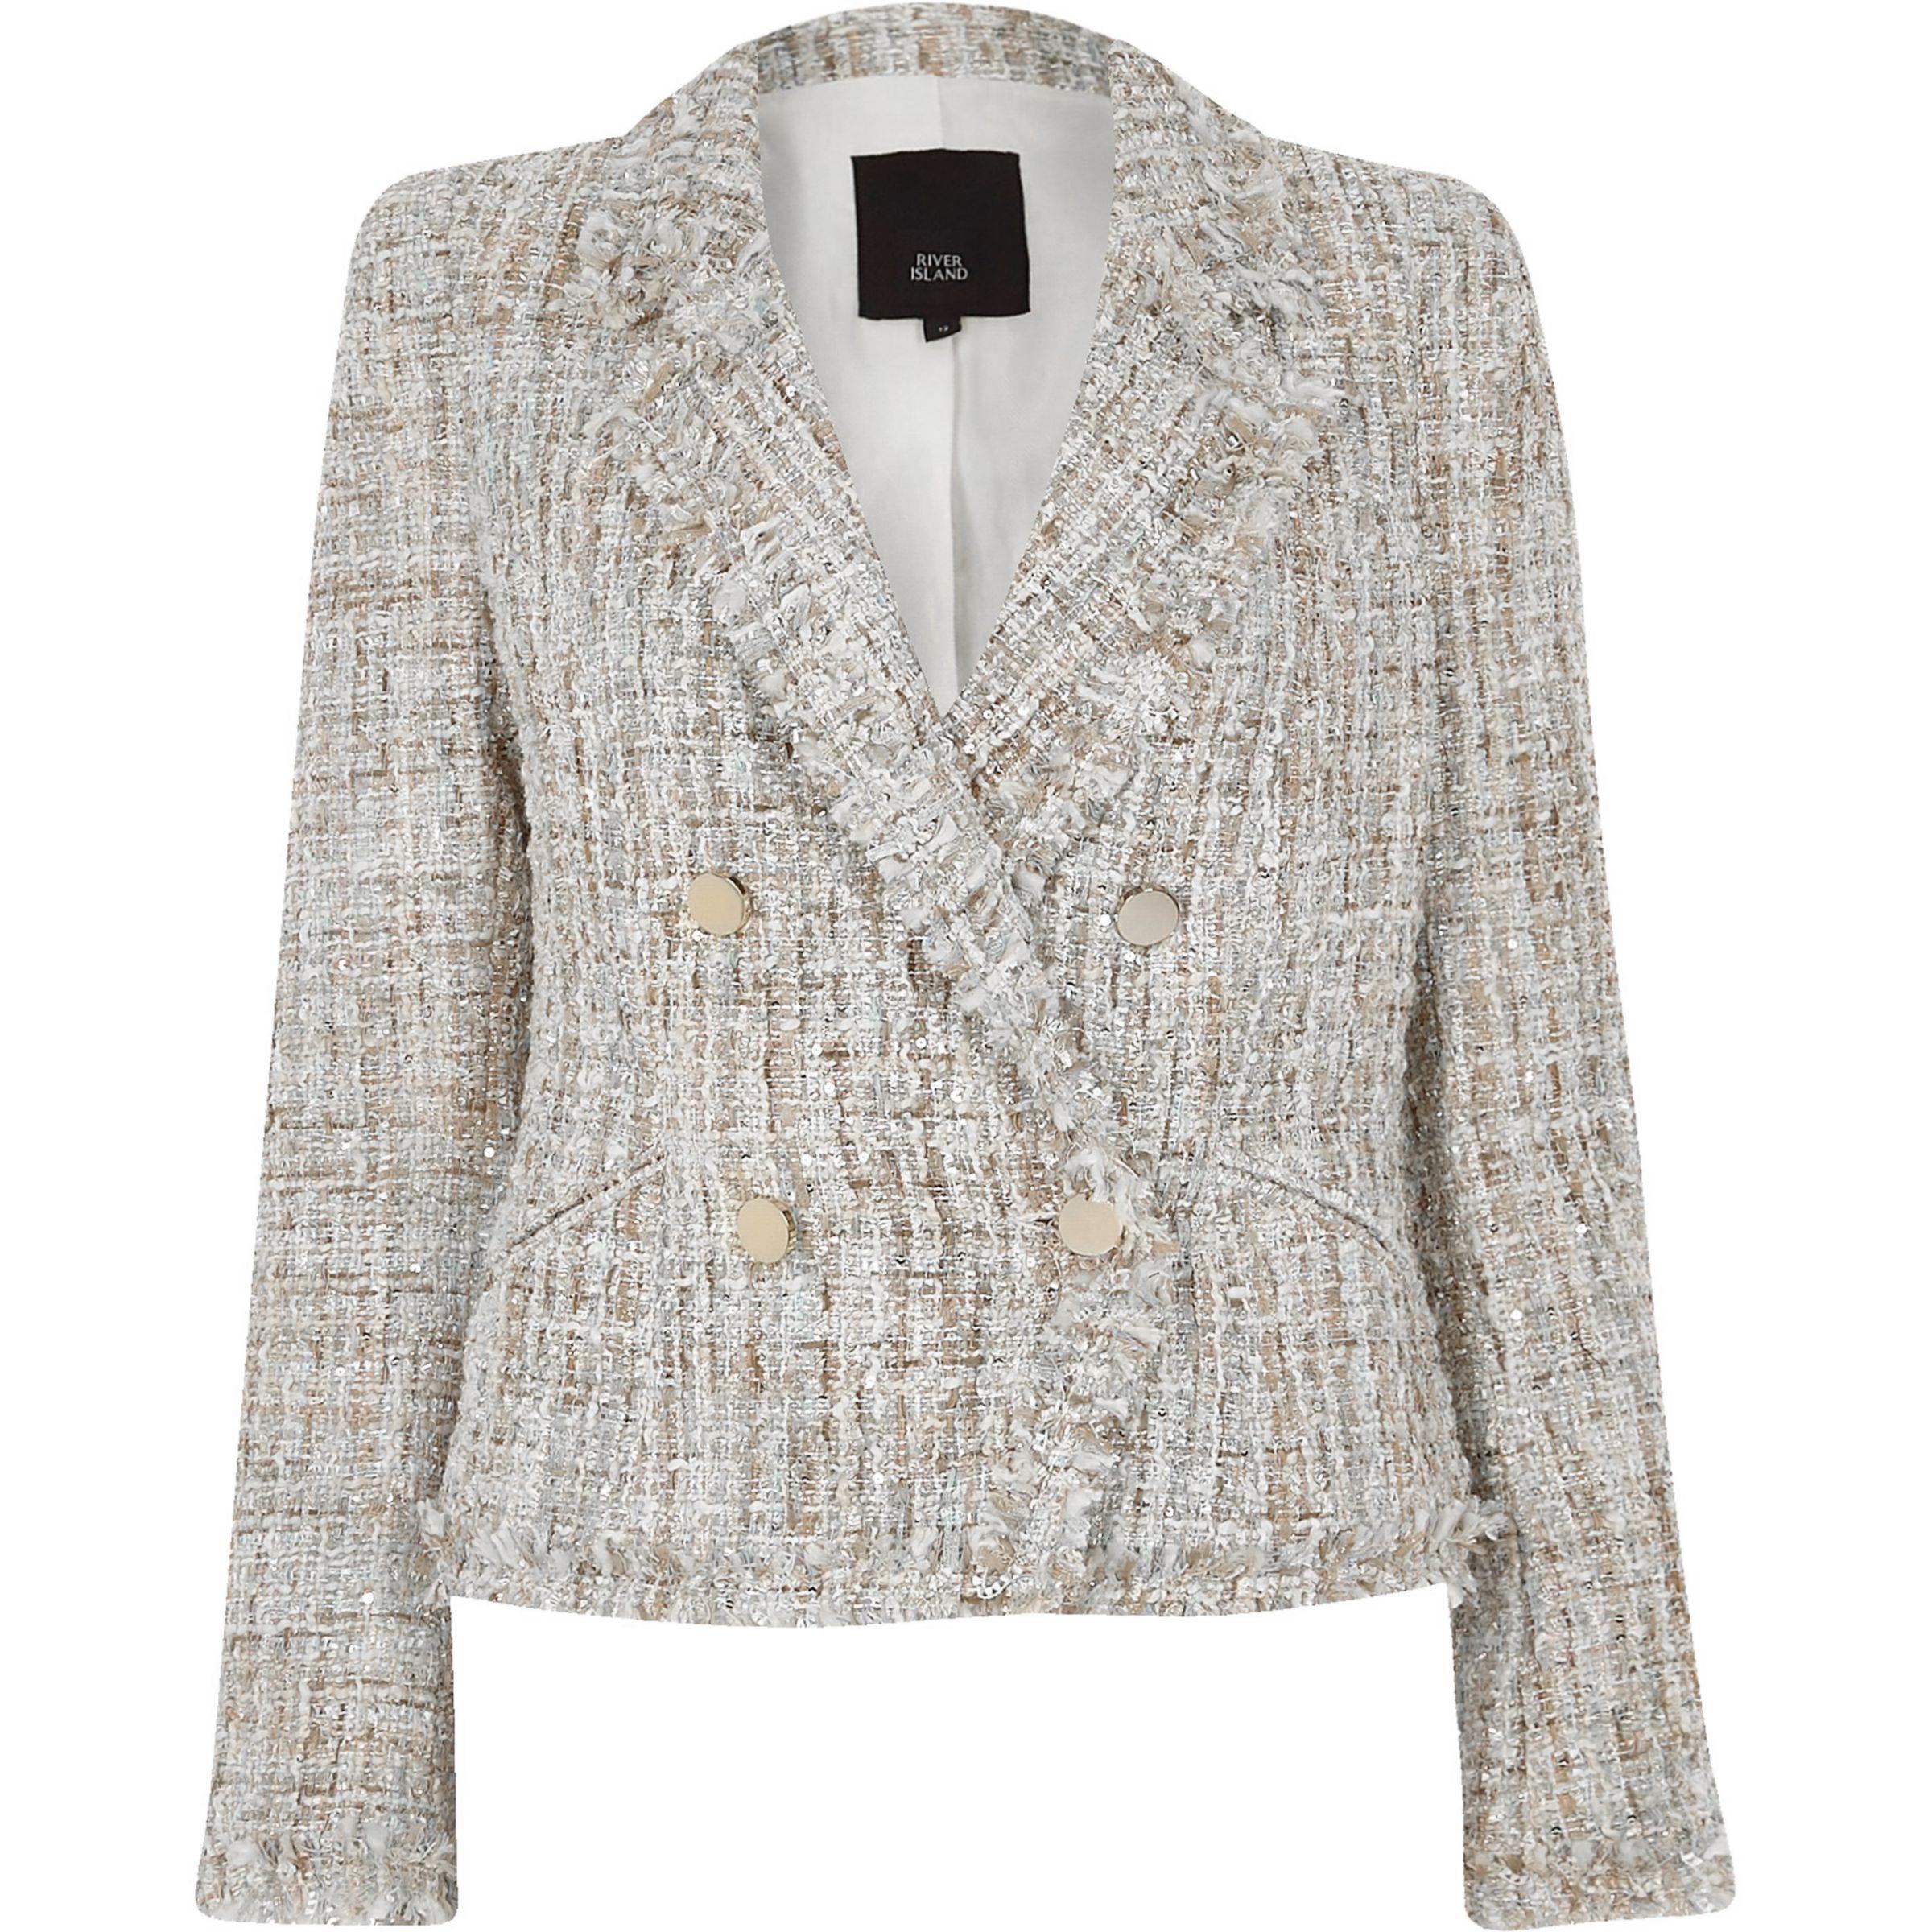 Lyst - River Island Cream Boucle Double-breasted Fitted Jacket in Natural